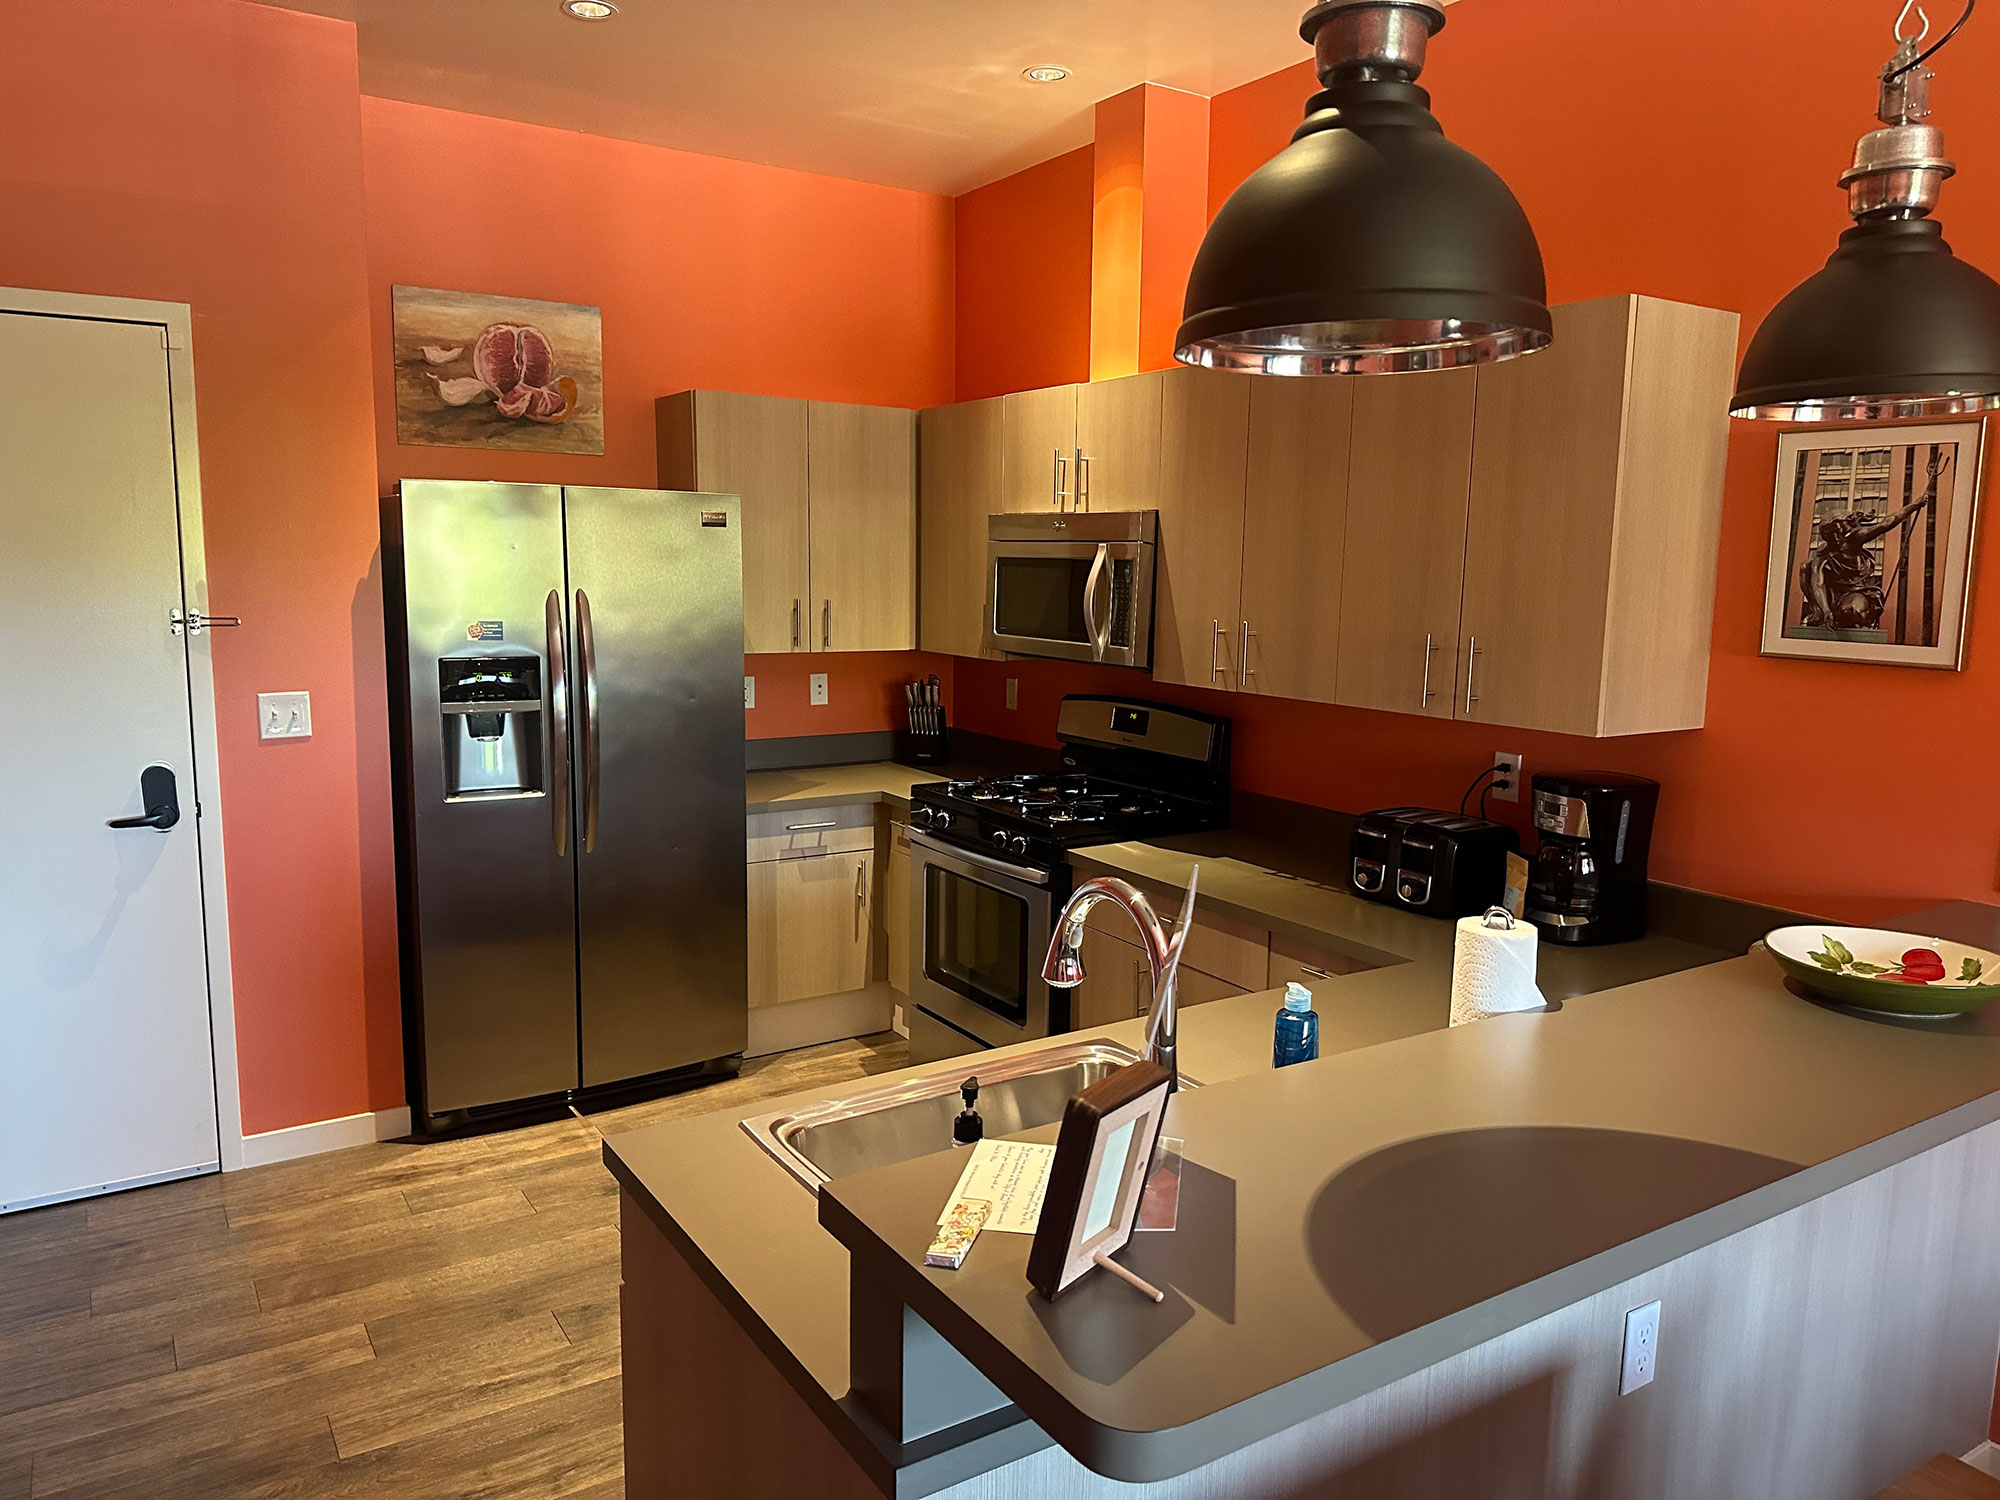 Chinook Suite 203 Kitchen with orange walls and art on the wall